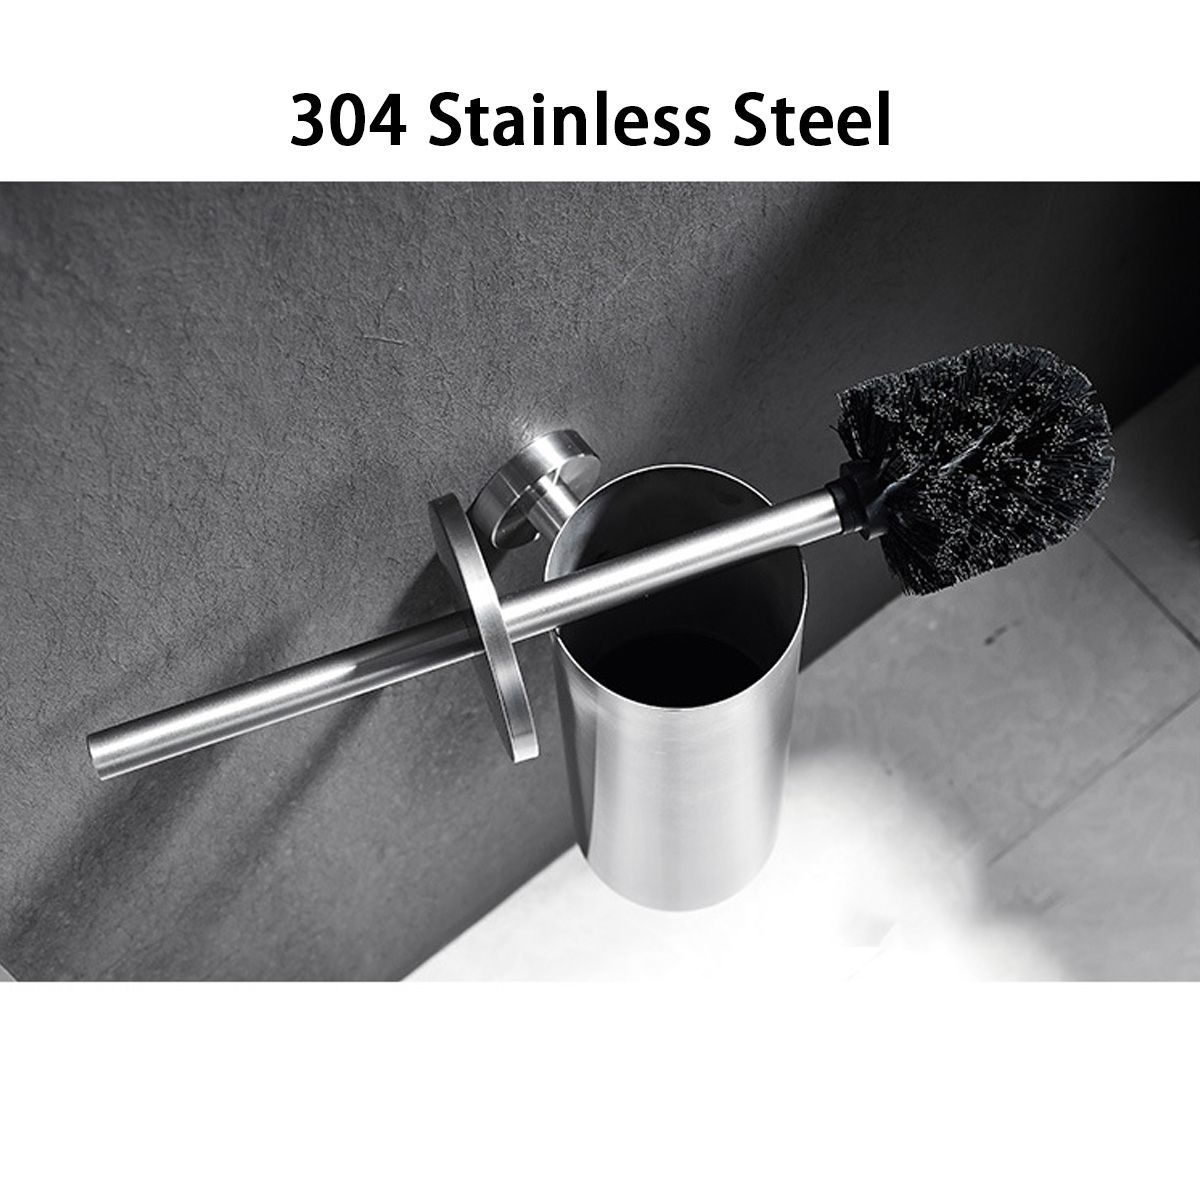 Toilet-Cleaning-Brushes-Wall-mounted-Stainless-Steel-Handle-Toilet-Bathroom-Easy-install-1600807-10